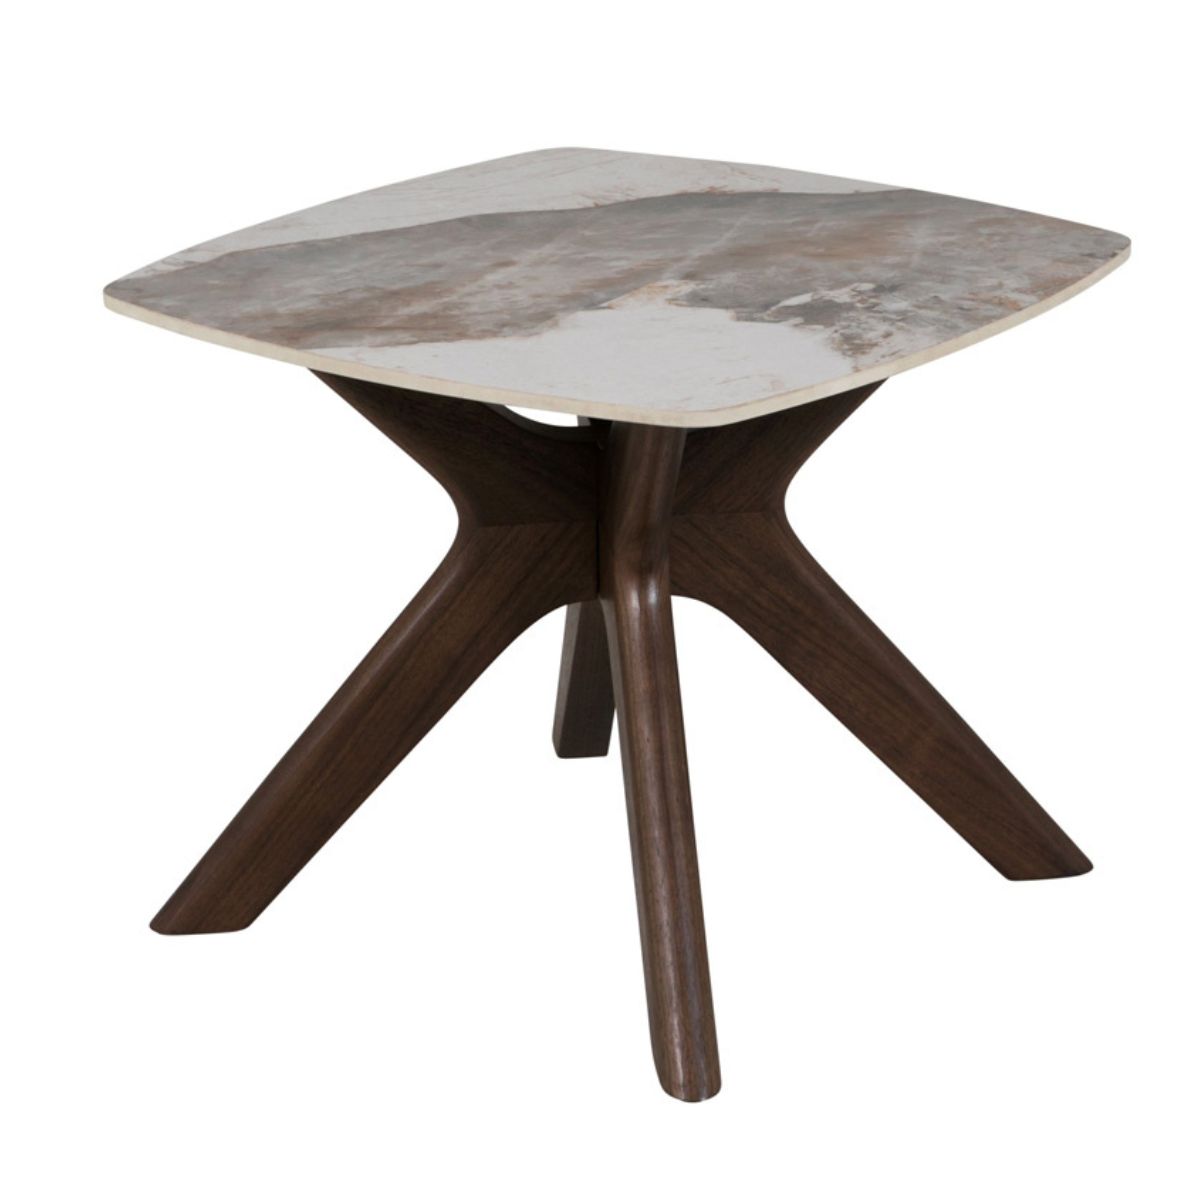 Aster stone Lamp Table - 1